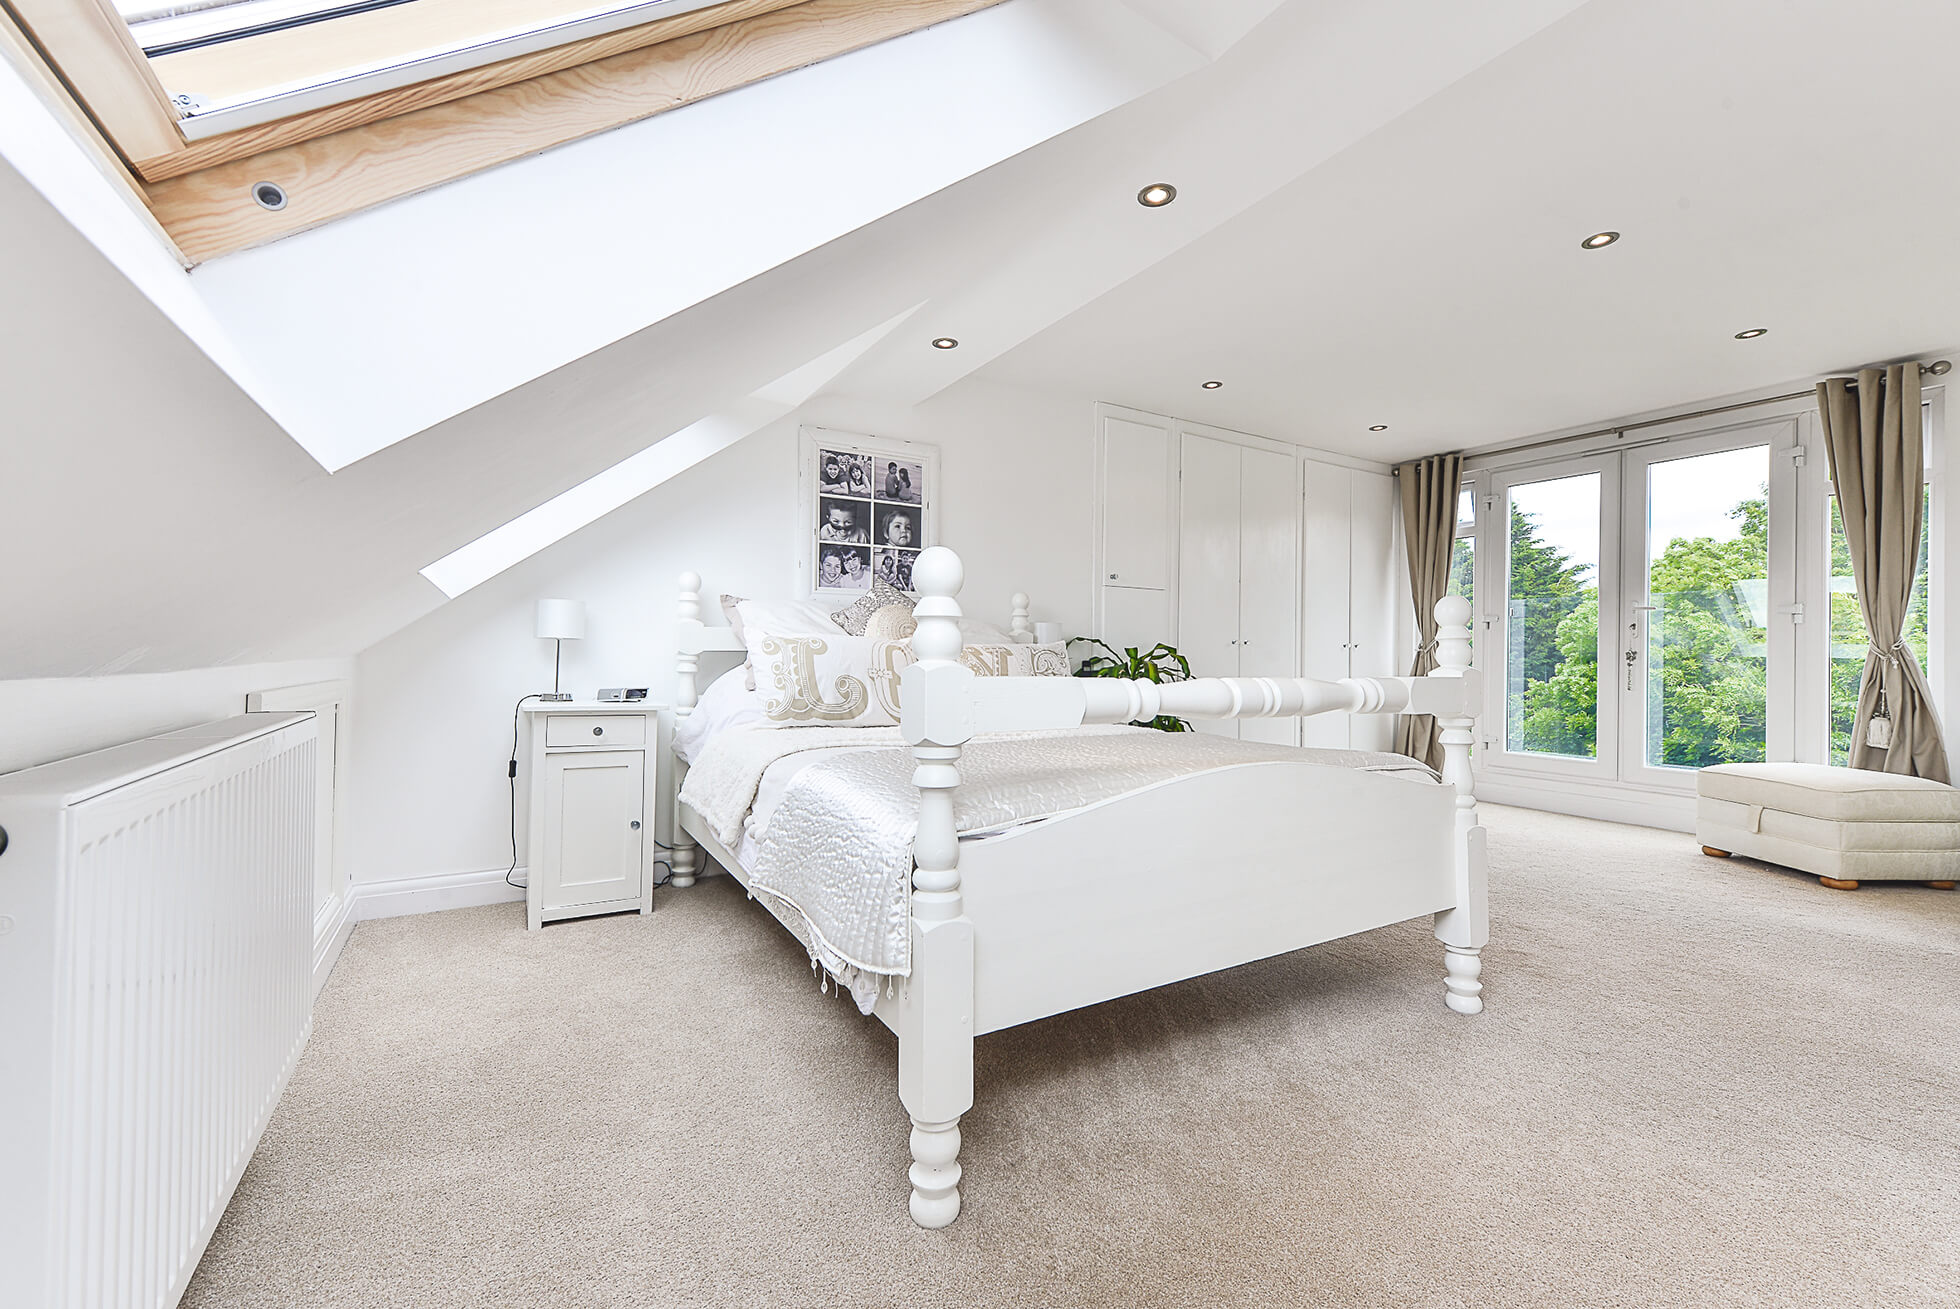 Do you have a question about converting your Loft in Bovingdon? Here are the most popular questions asked by our clients.